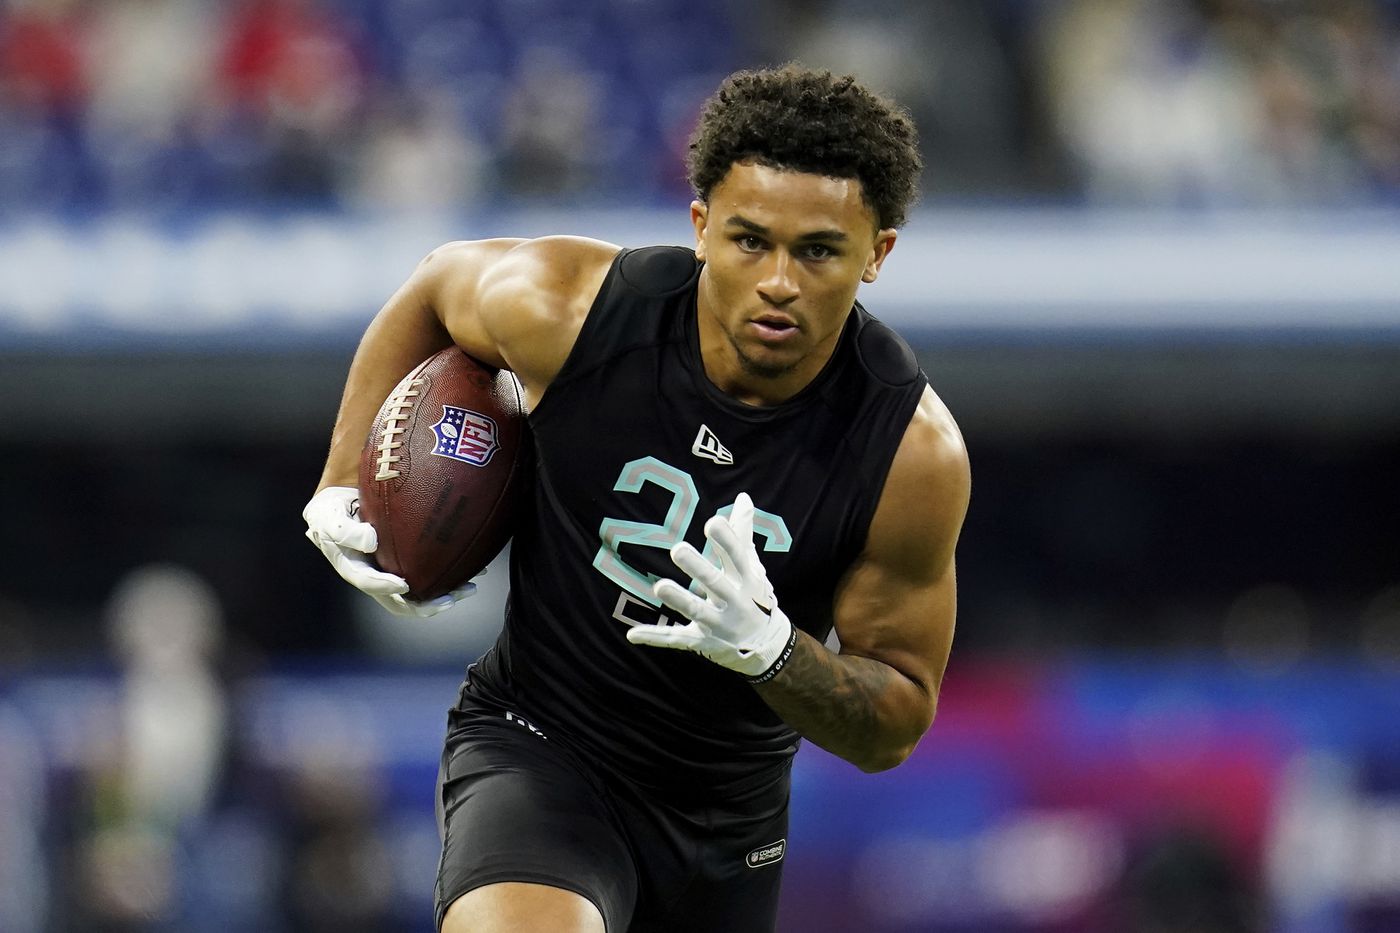 Washington defensive back Trent McDuffie participates in a drill at the NFL scouting combine in Indianapolis, March 6, 2022.